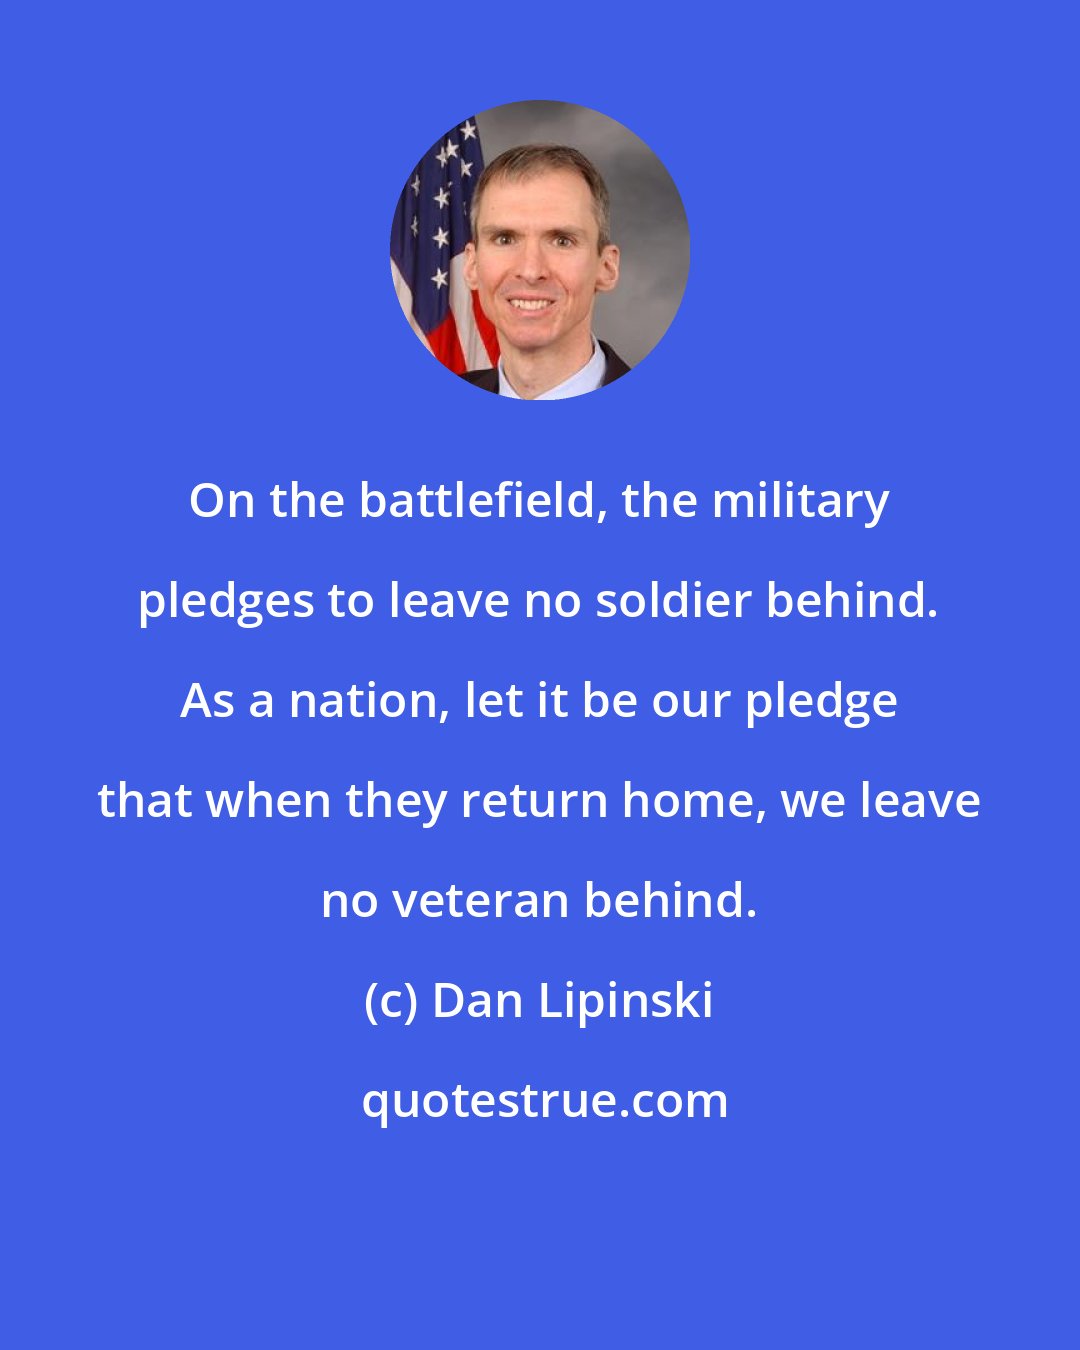 Dan Lipinski: On the battlefield, the military pledges to leave no soldier behind. As a nation, let it be our pledge that when they return home, we leave no veteran behind.